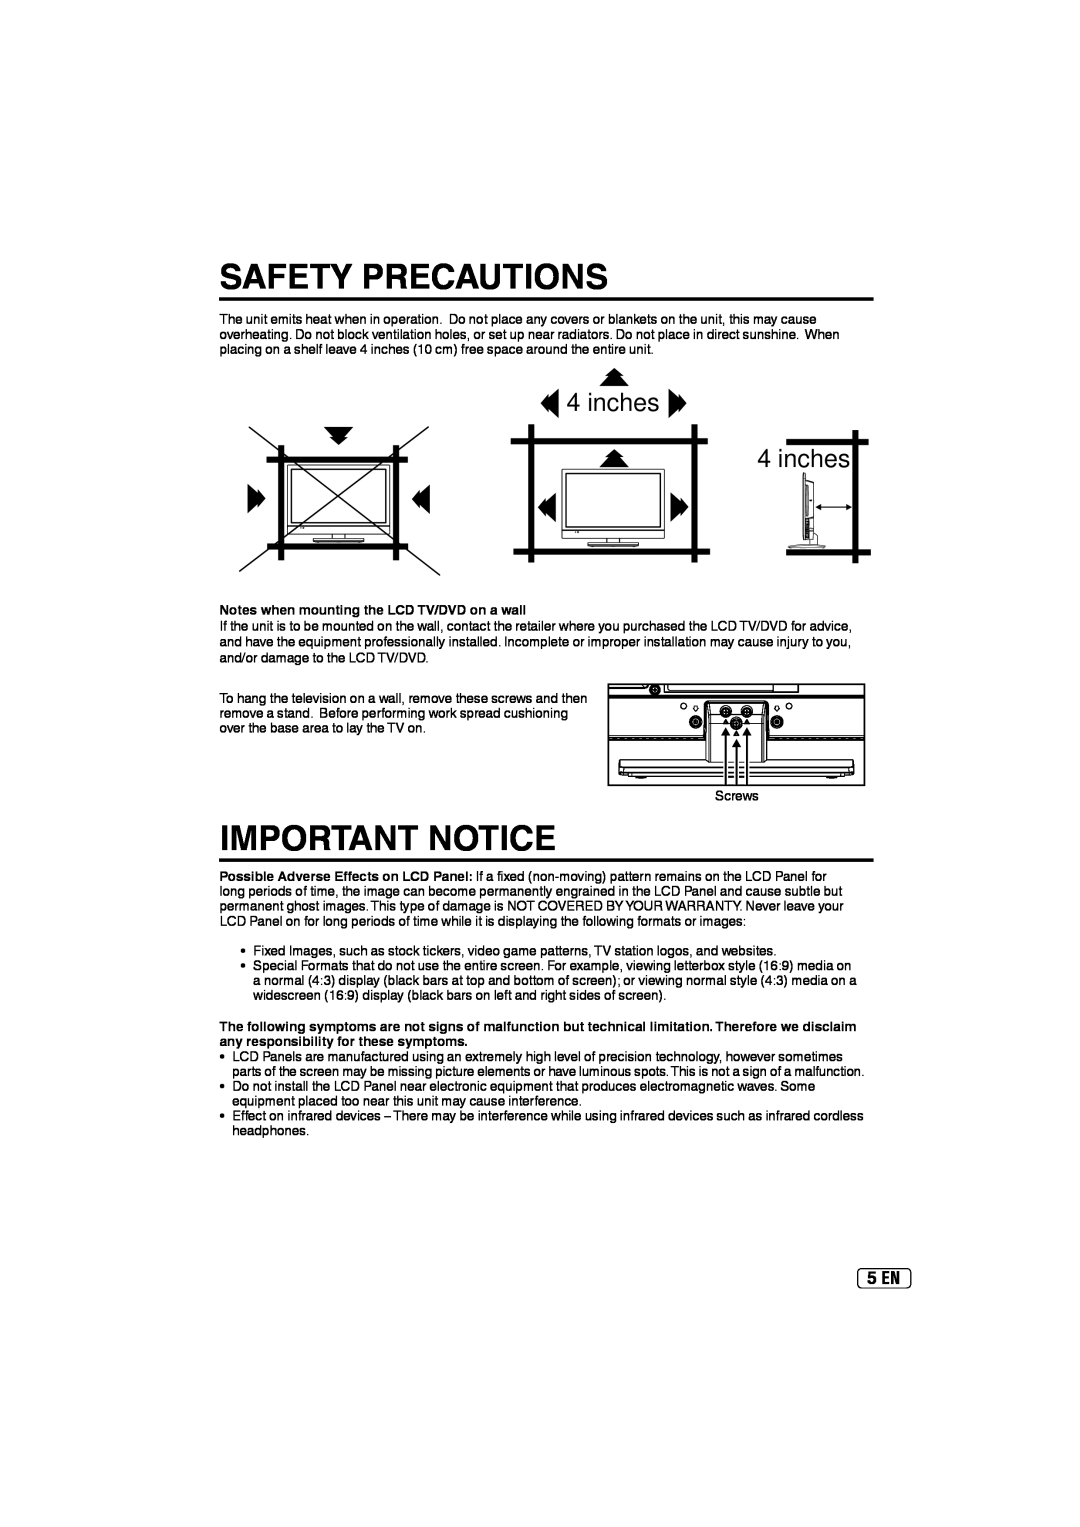 Sansui SLEDVD197 Safety Precautions, Important Notice, 5 EN, inches 4 inches, Notes when mounting the LCD TV/DVD on a wall 